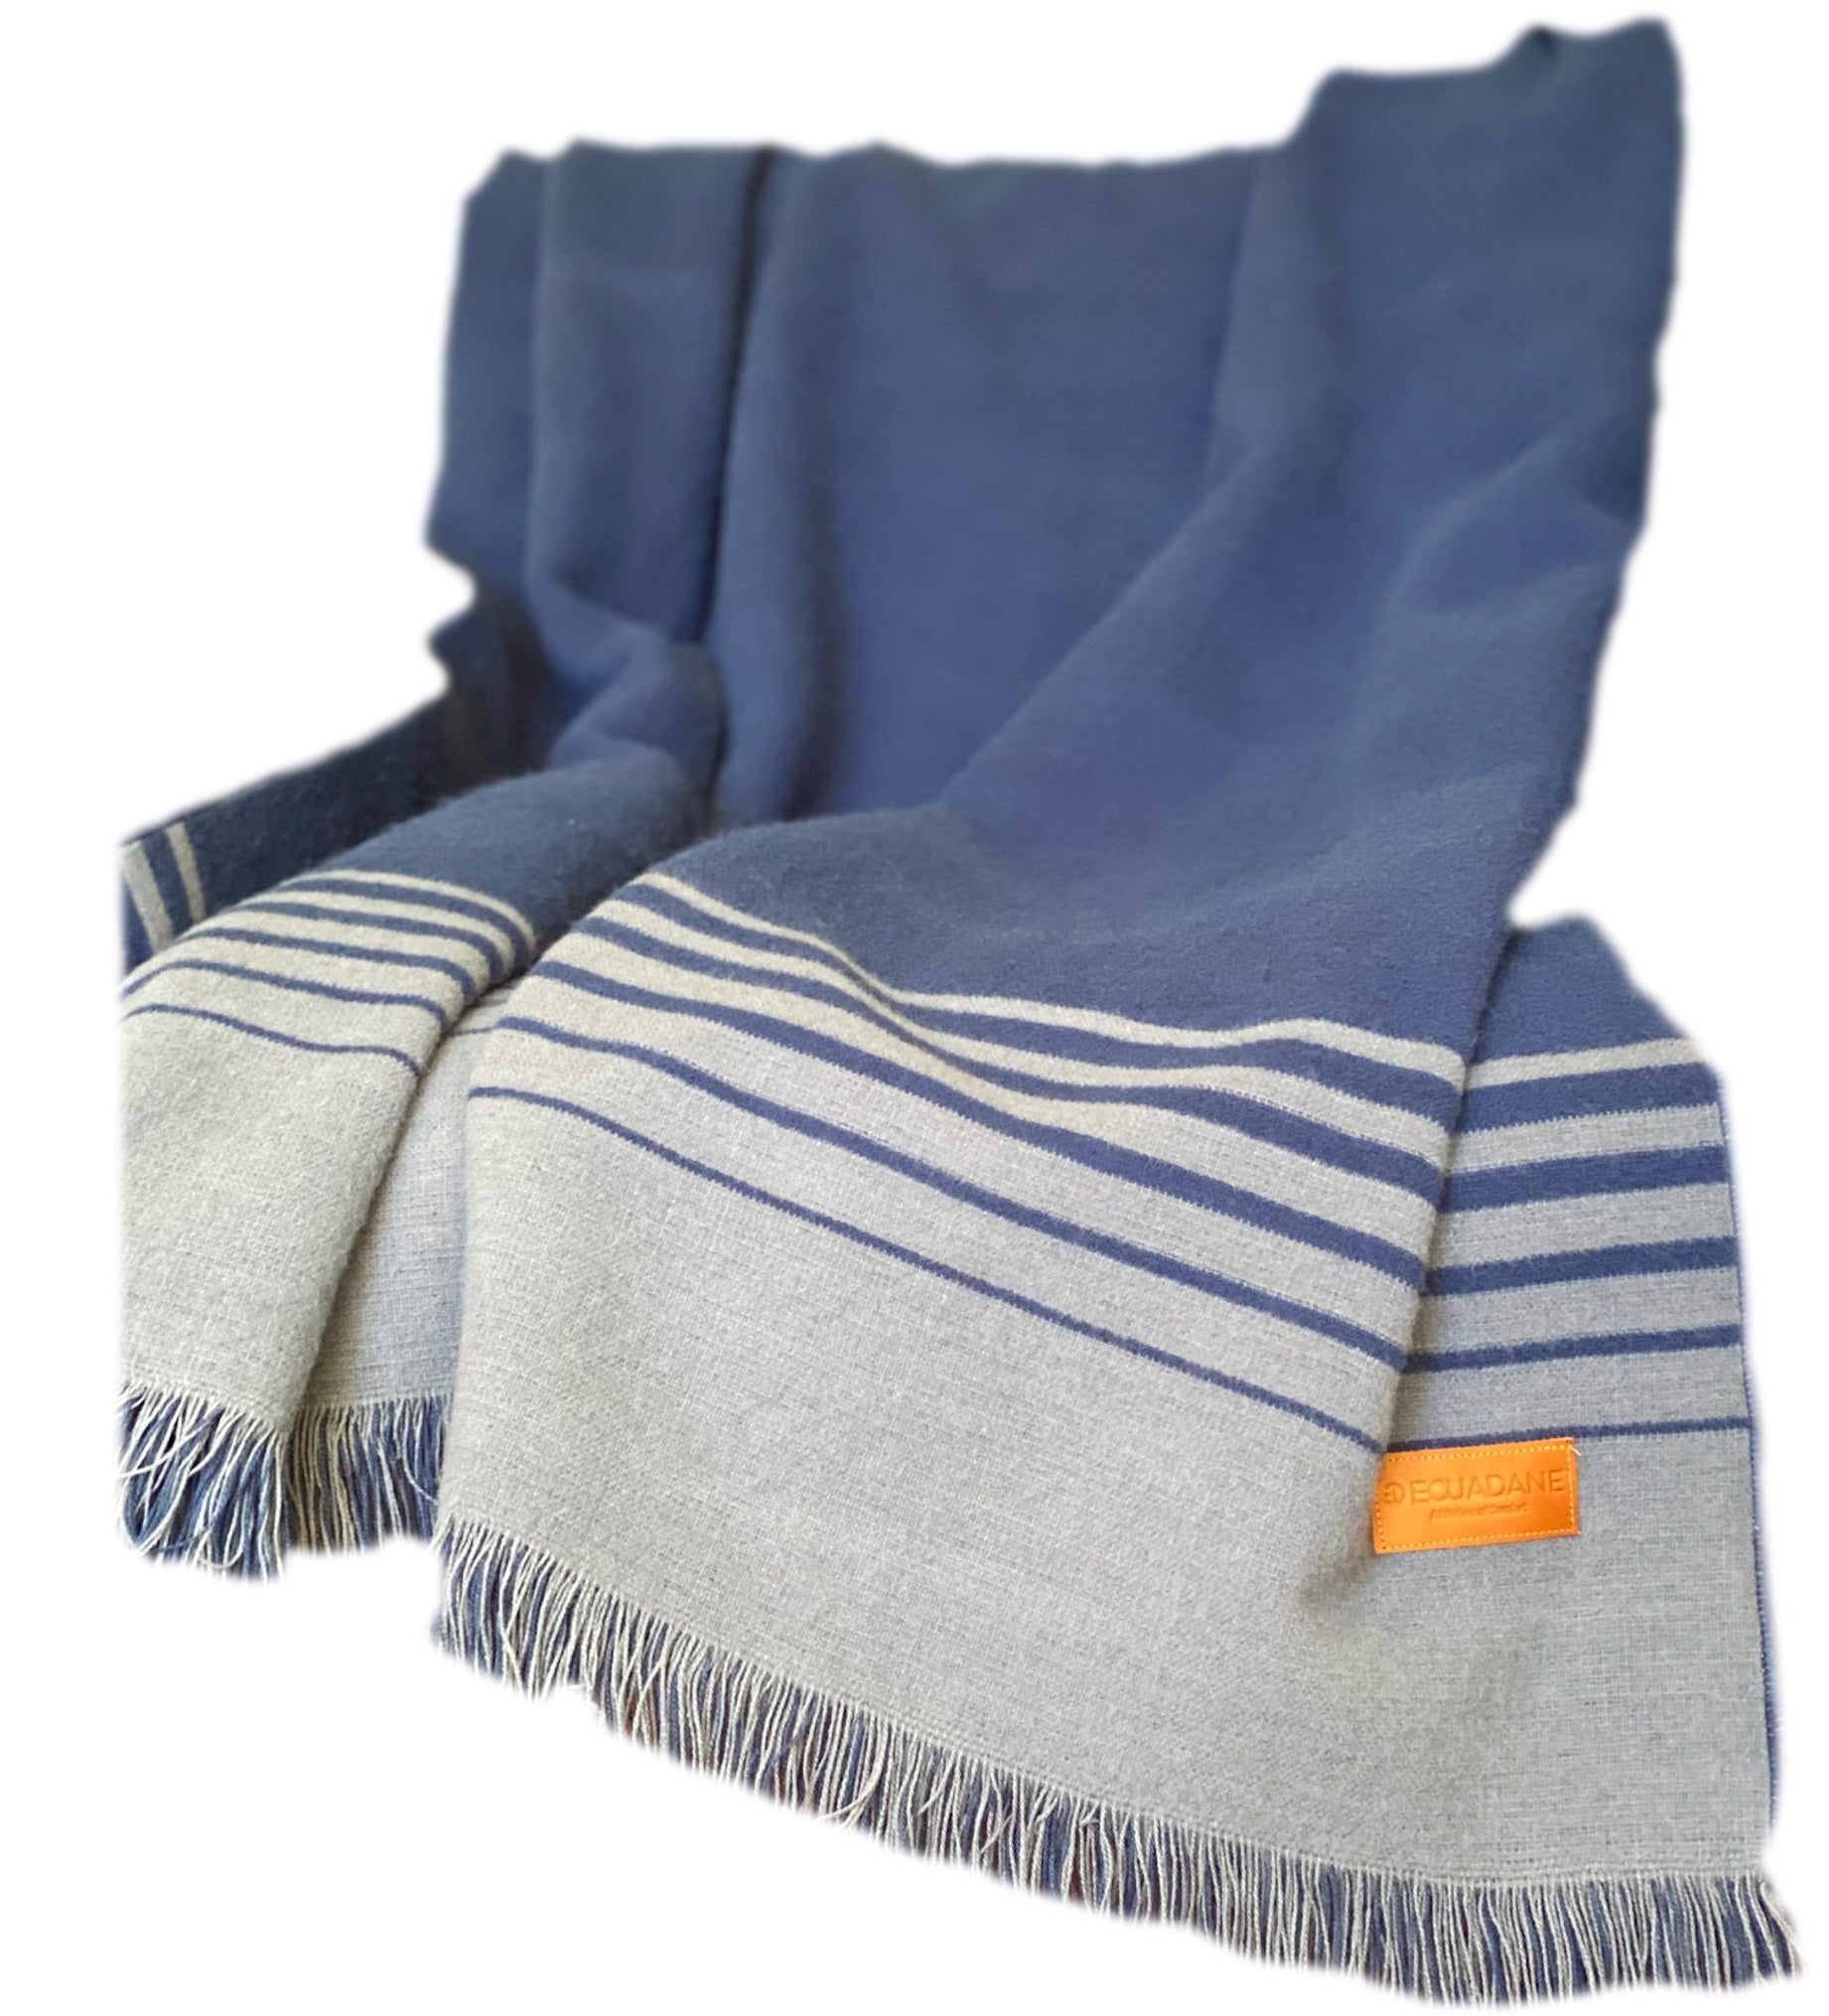 Blue and Gray Woven Microfiber Striped Throw Blanket with Fringe